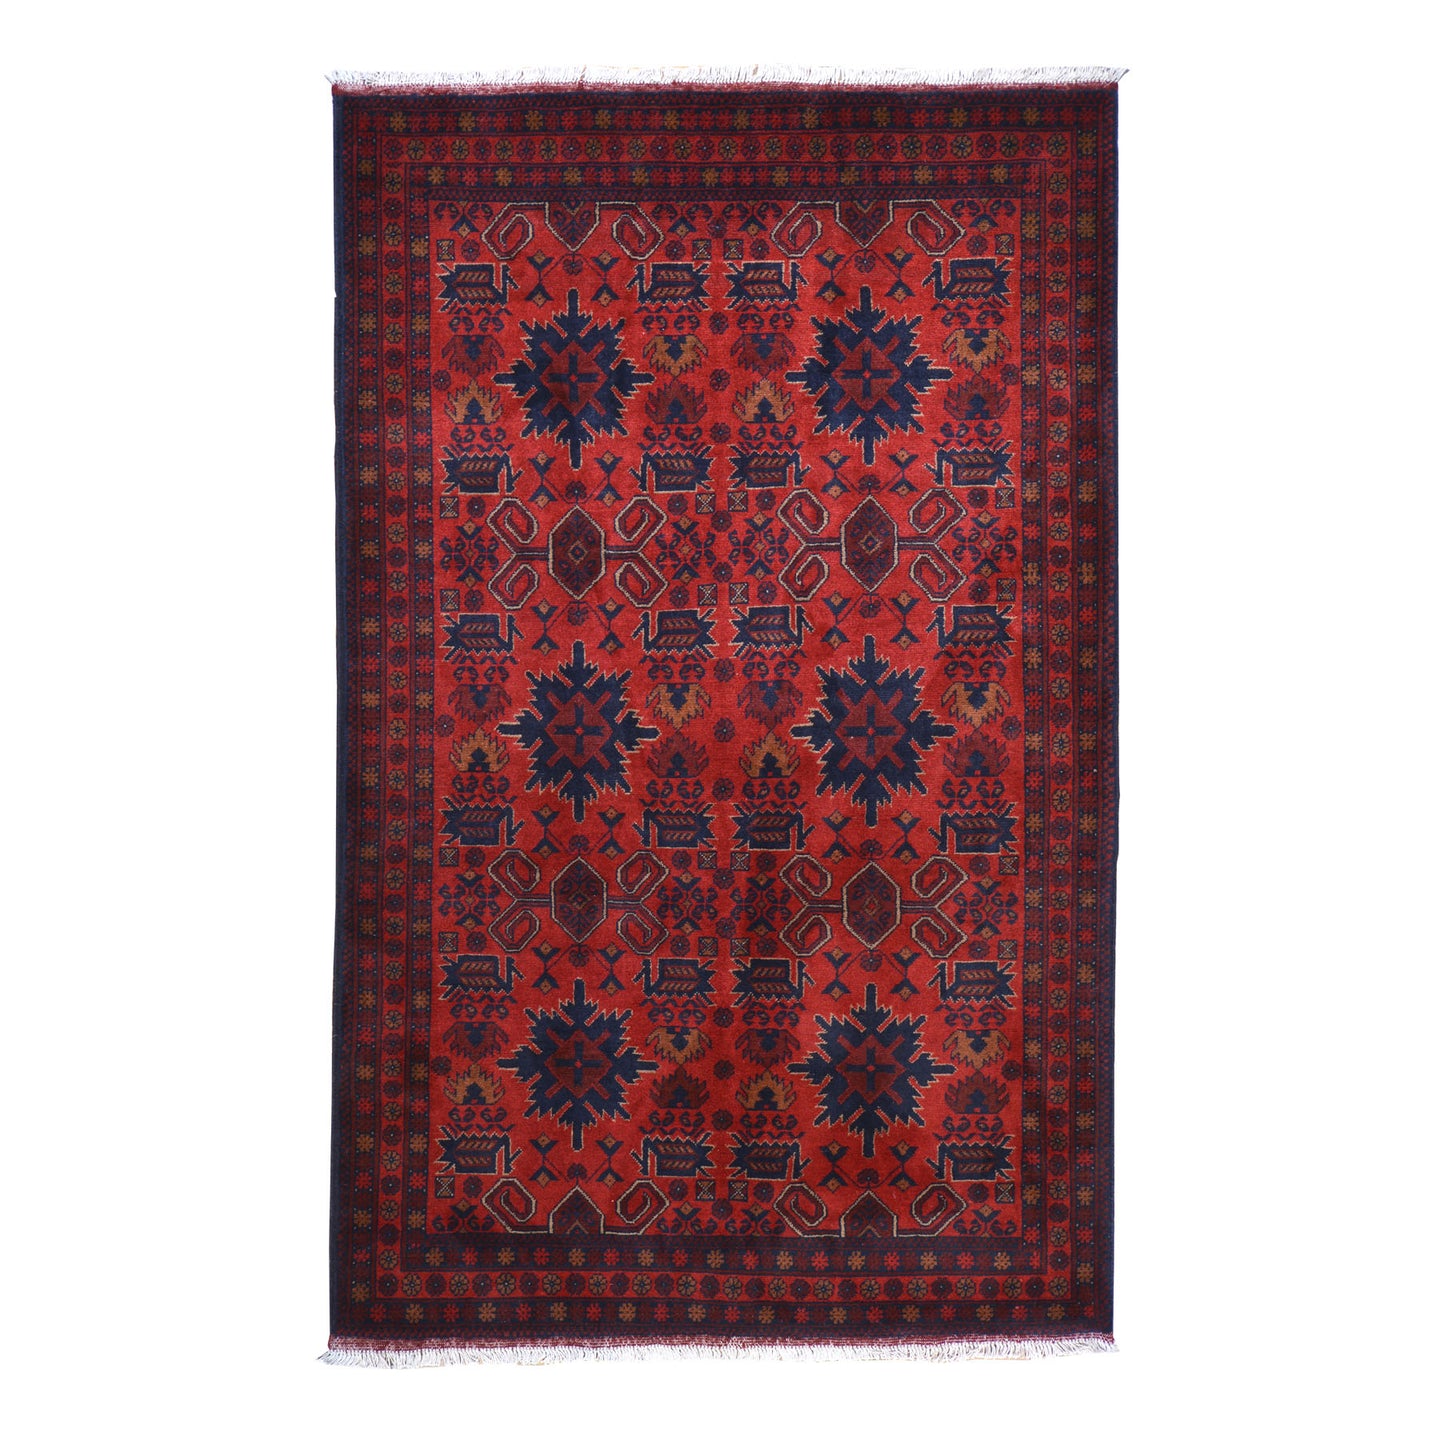 Oriental rugs, hand-knotted carpets, sustainable rugs, classic world oriental rugs, handmade, United States, interior design,  Brral-6624